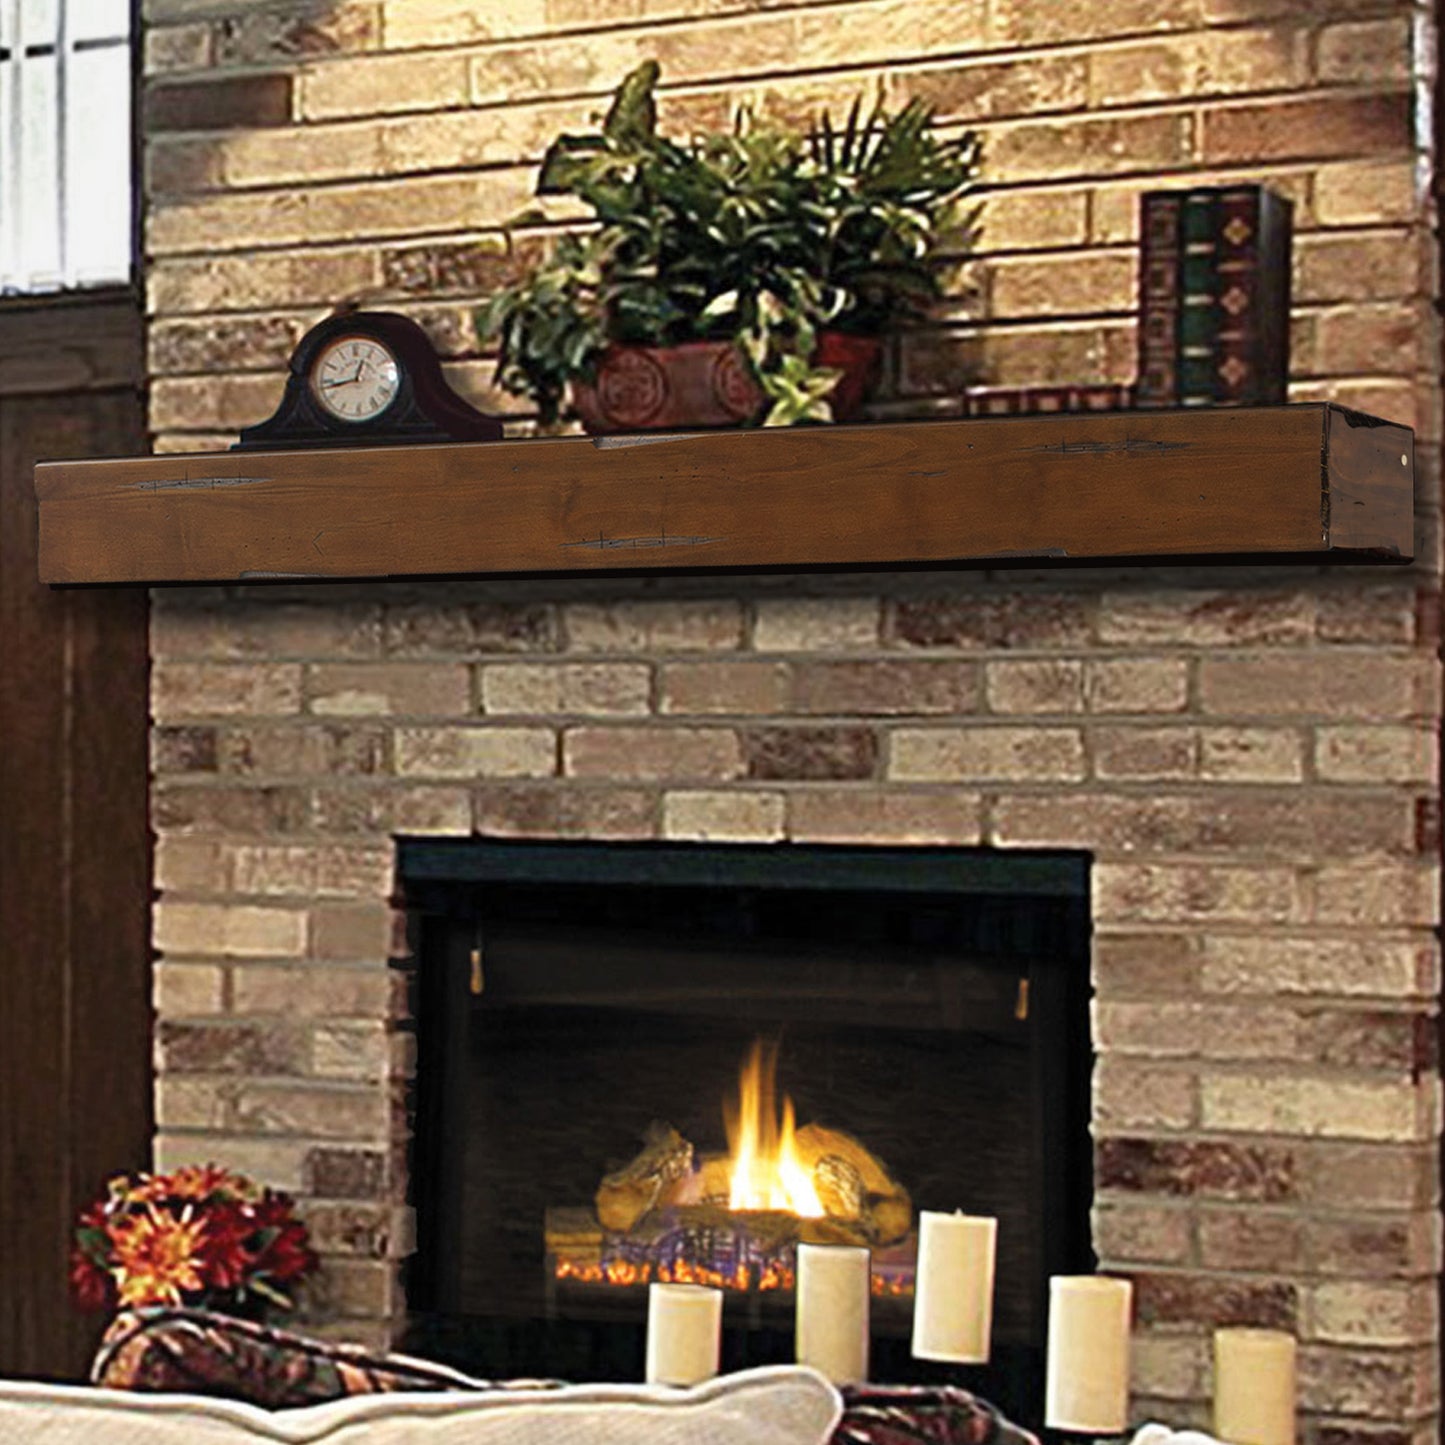 Pearl Mantels 60" Shenandoah Fireplace Mantel with Corbels 412-60-70 - Cherry Distressed Finish